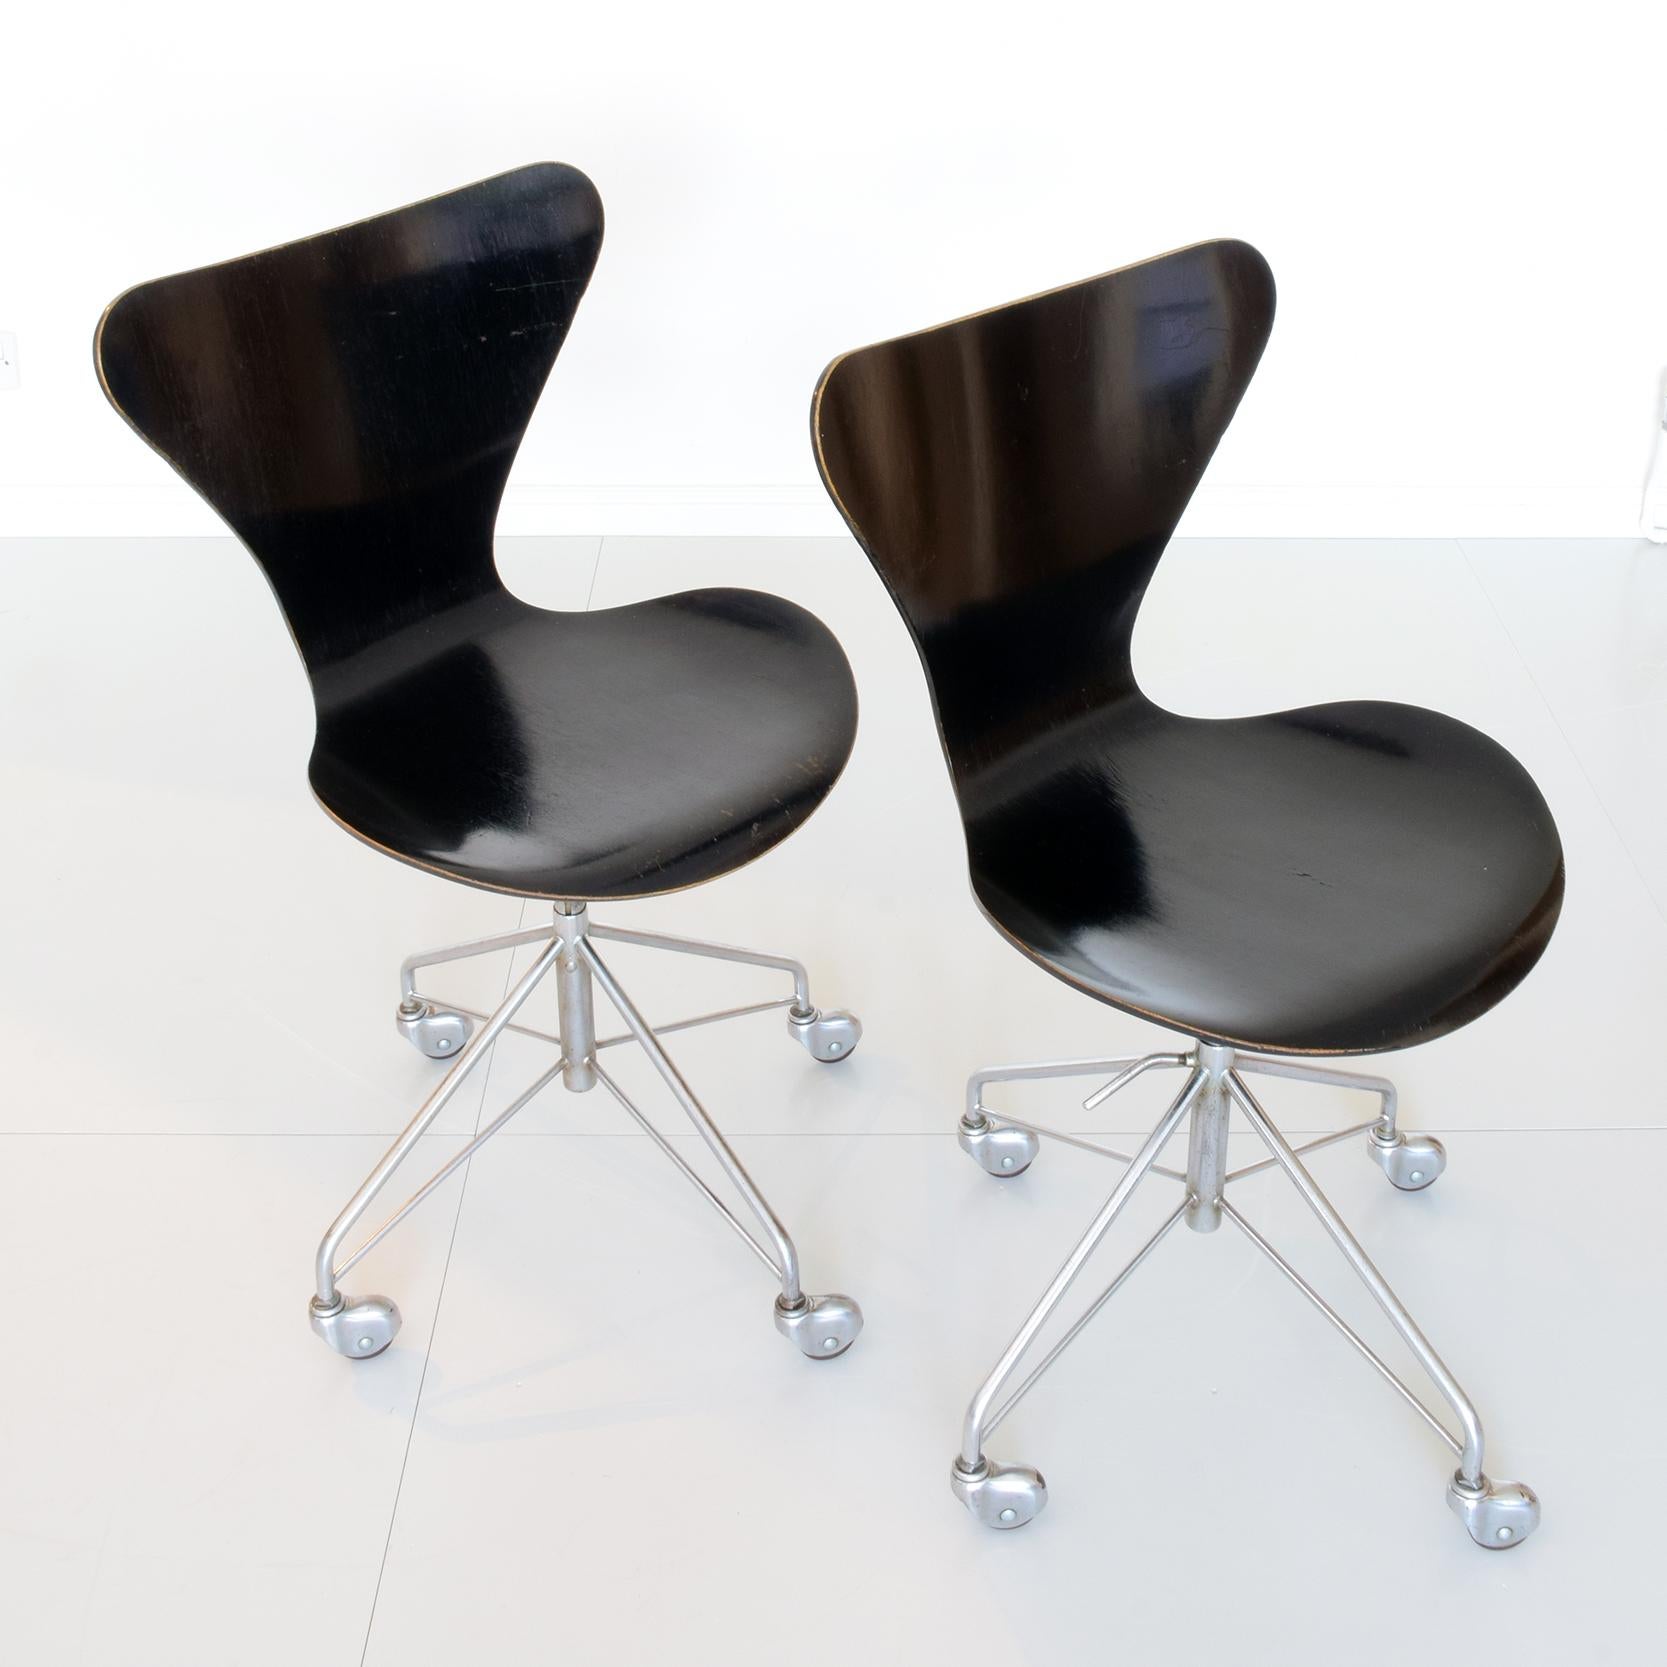 Mid-20th Century Arne Jacobsen Model 3117 Adjustable Desk Work Chairs, 1955, Early Matching Pair For Sale